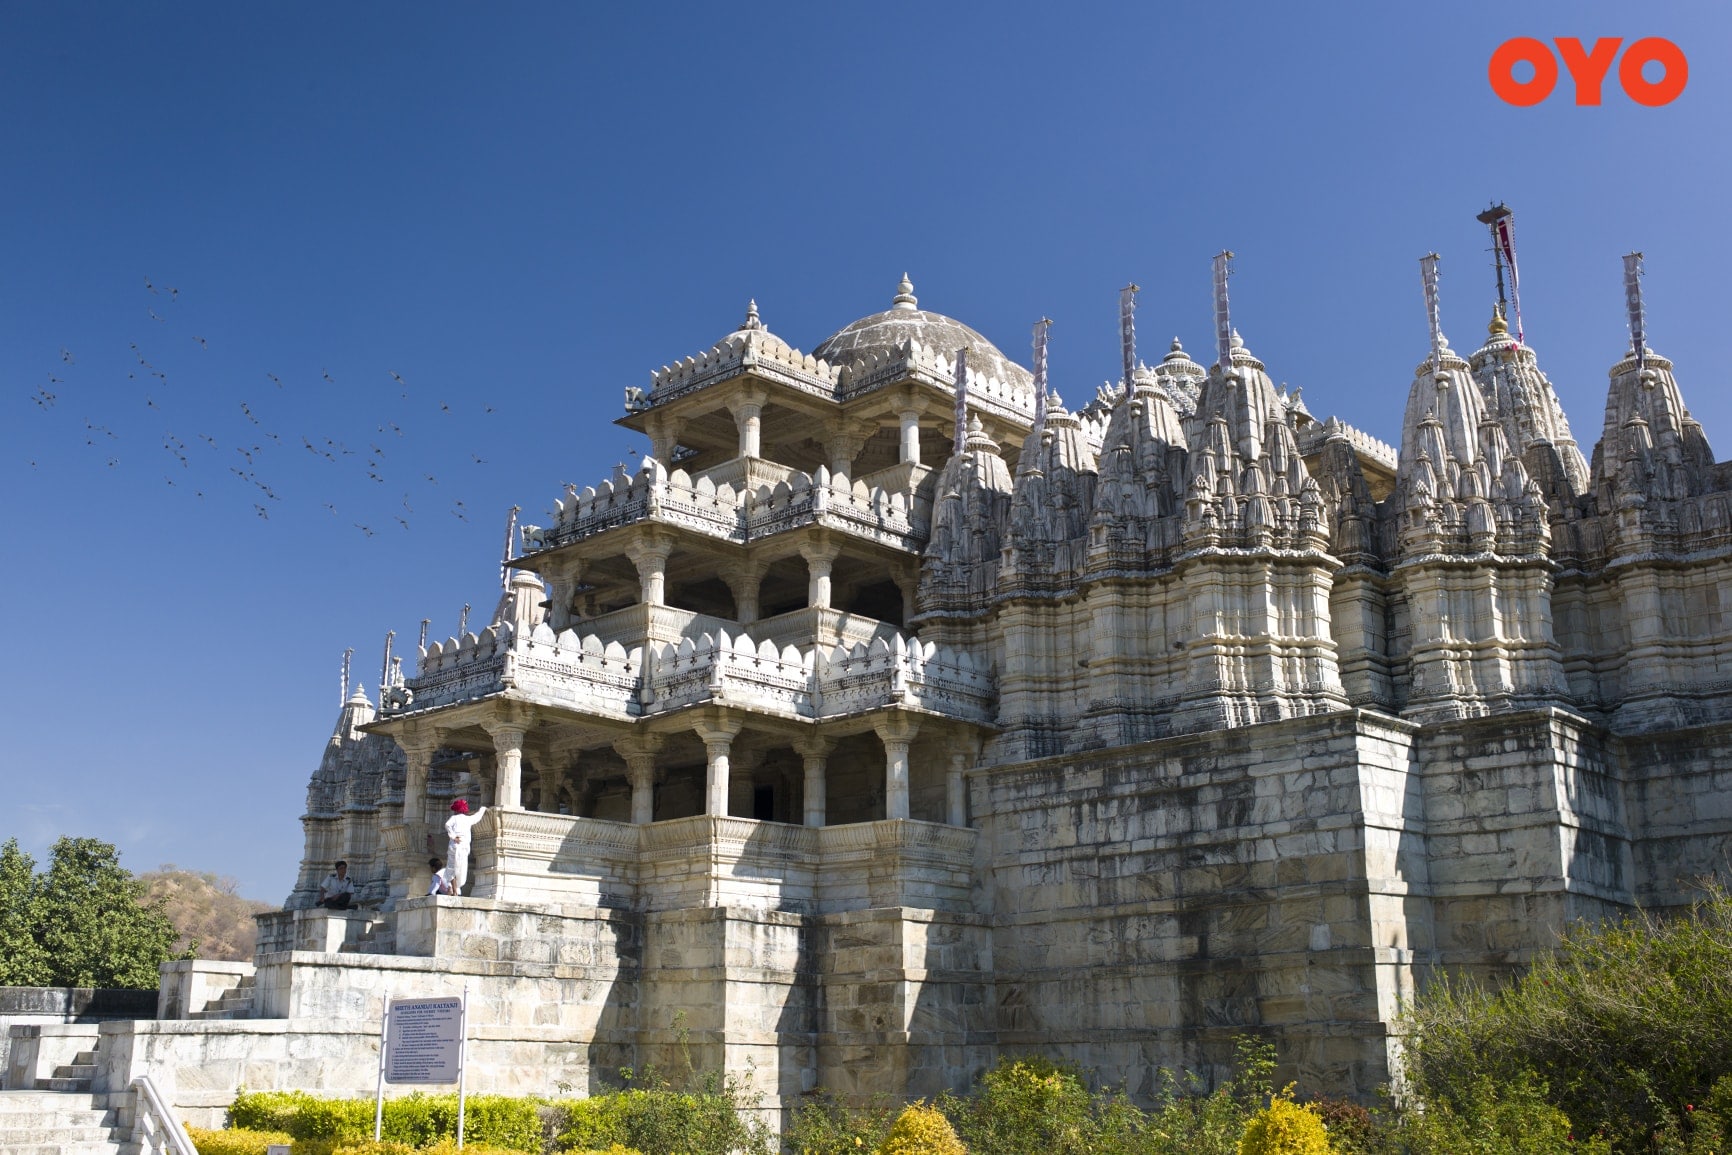 Dilwara Temples, Mount Abu- One of the most famous temple of India